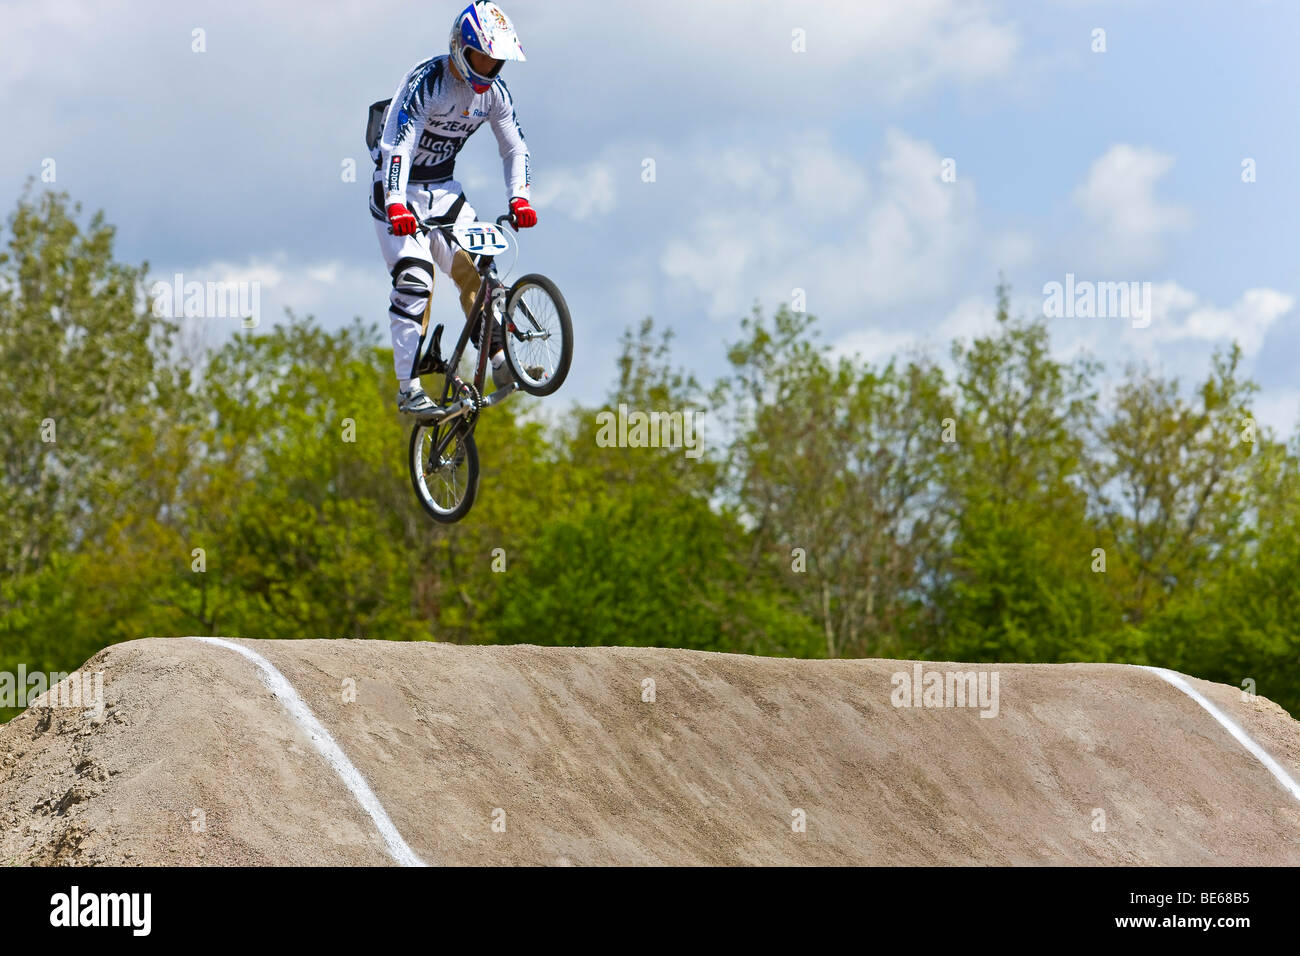 Jumping competitor at the BMX Supercross World Cup in Copenhagen, Denmark, Europe Stock Photo